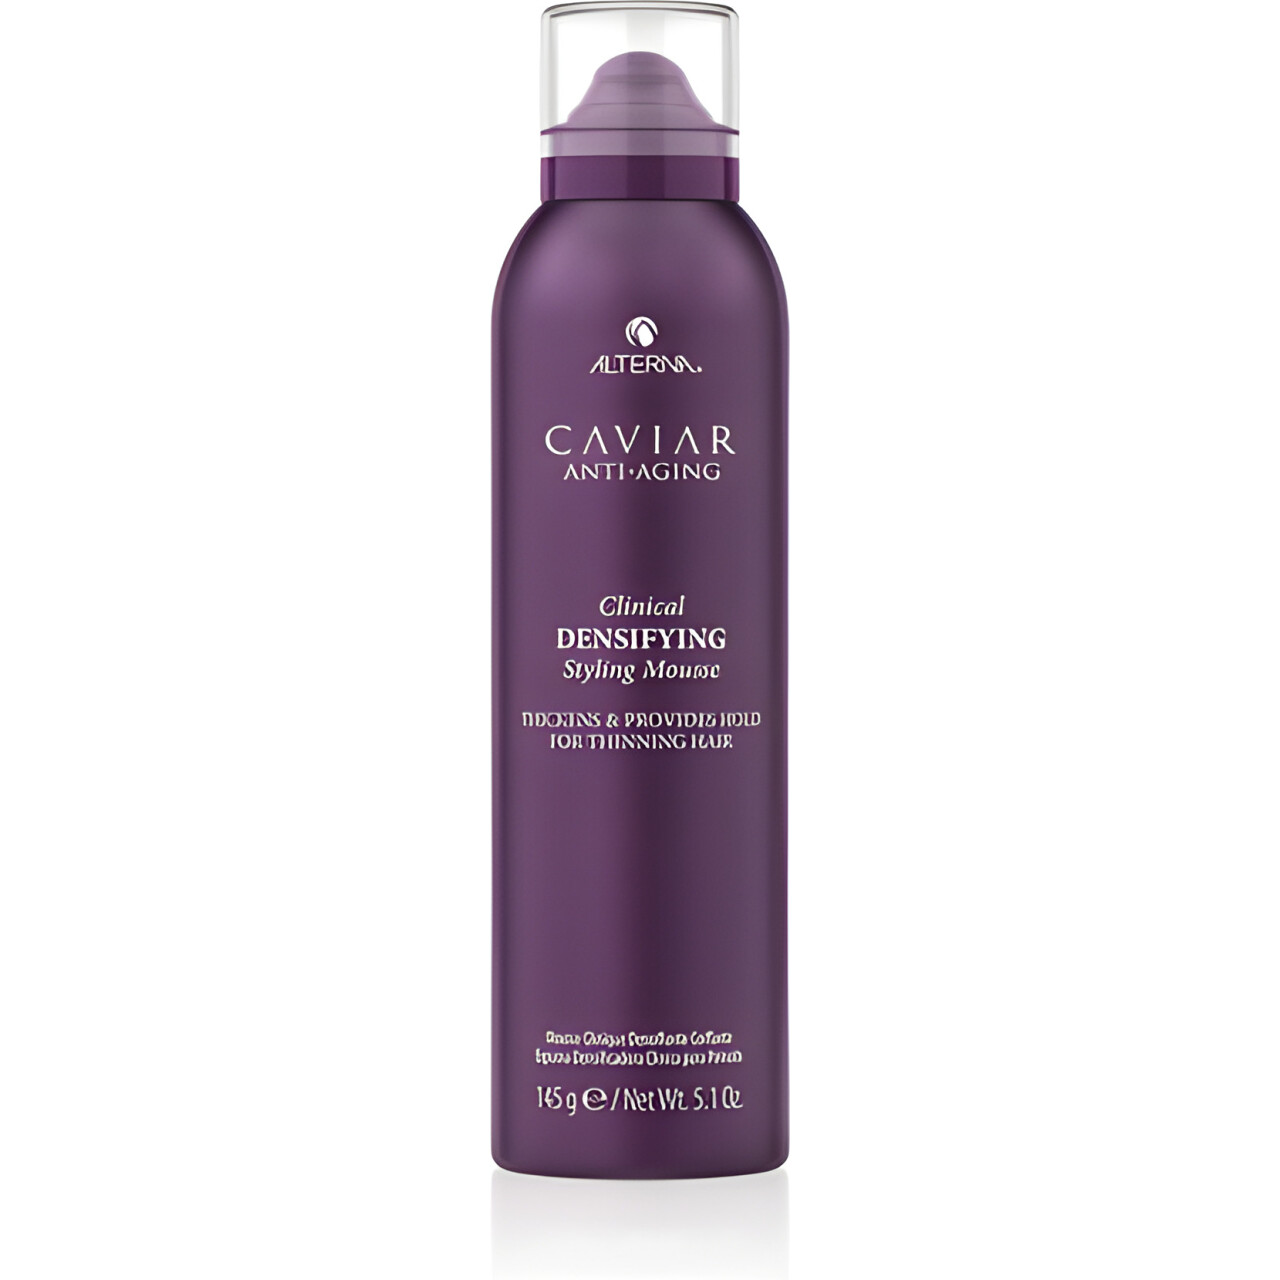 Мусс Alterna Caviar Anti-Aging Clinical Densifying Styling Mousse